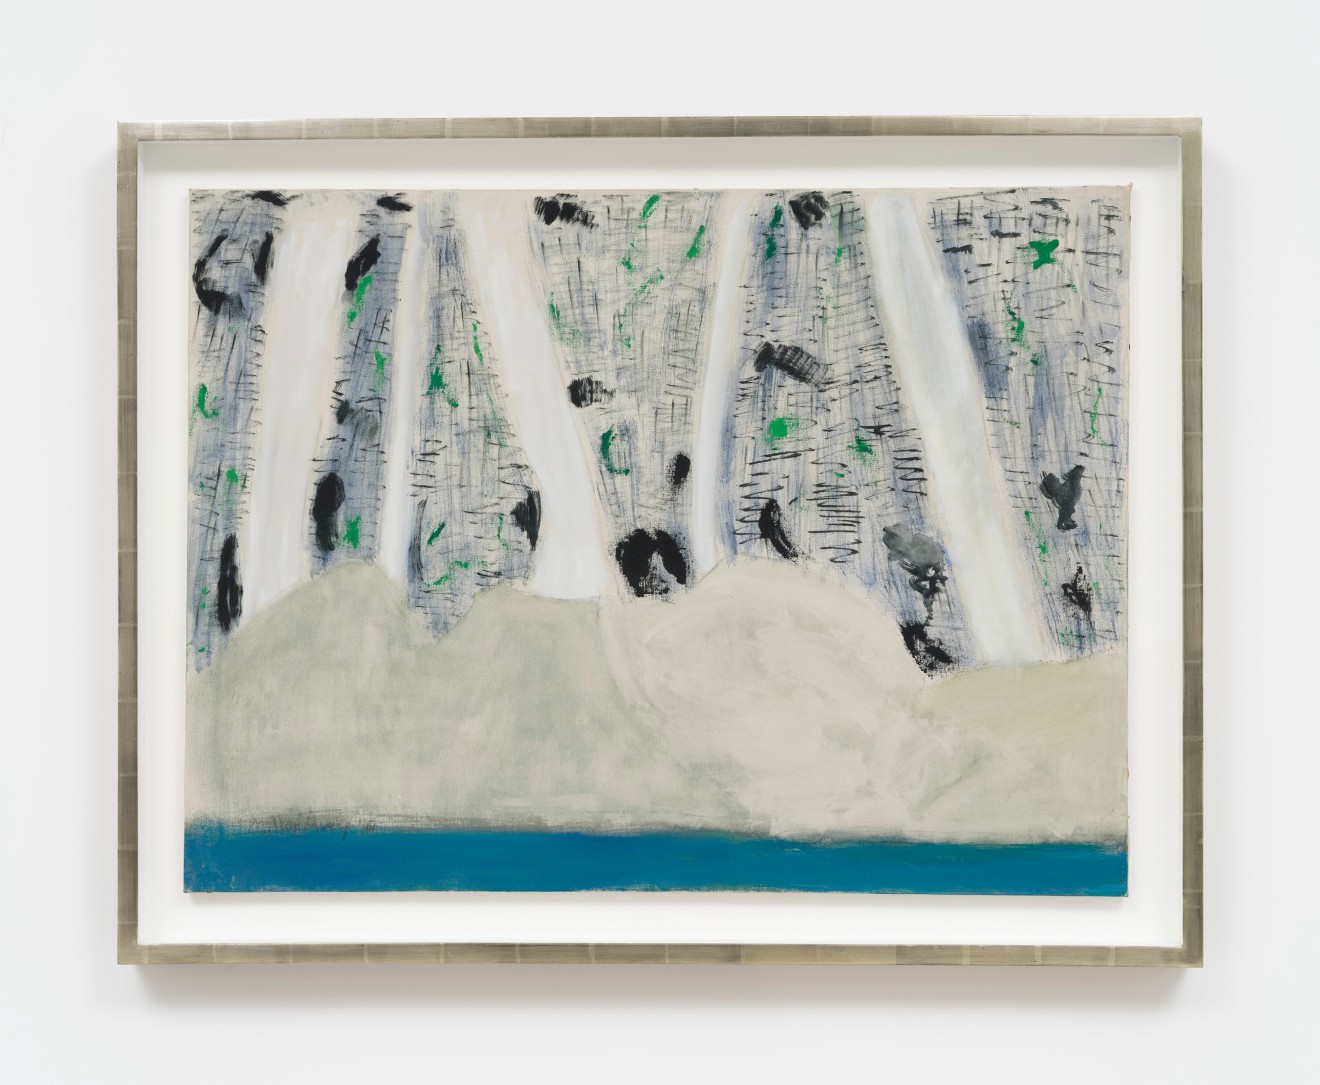 Milton Avery, Birches by the brook, 1961